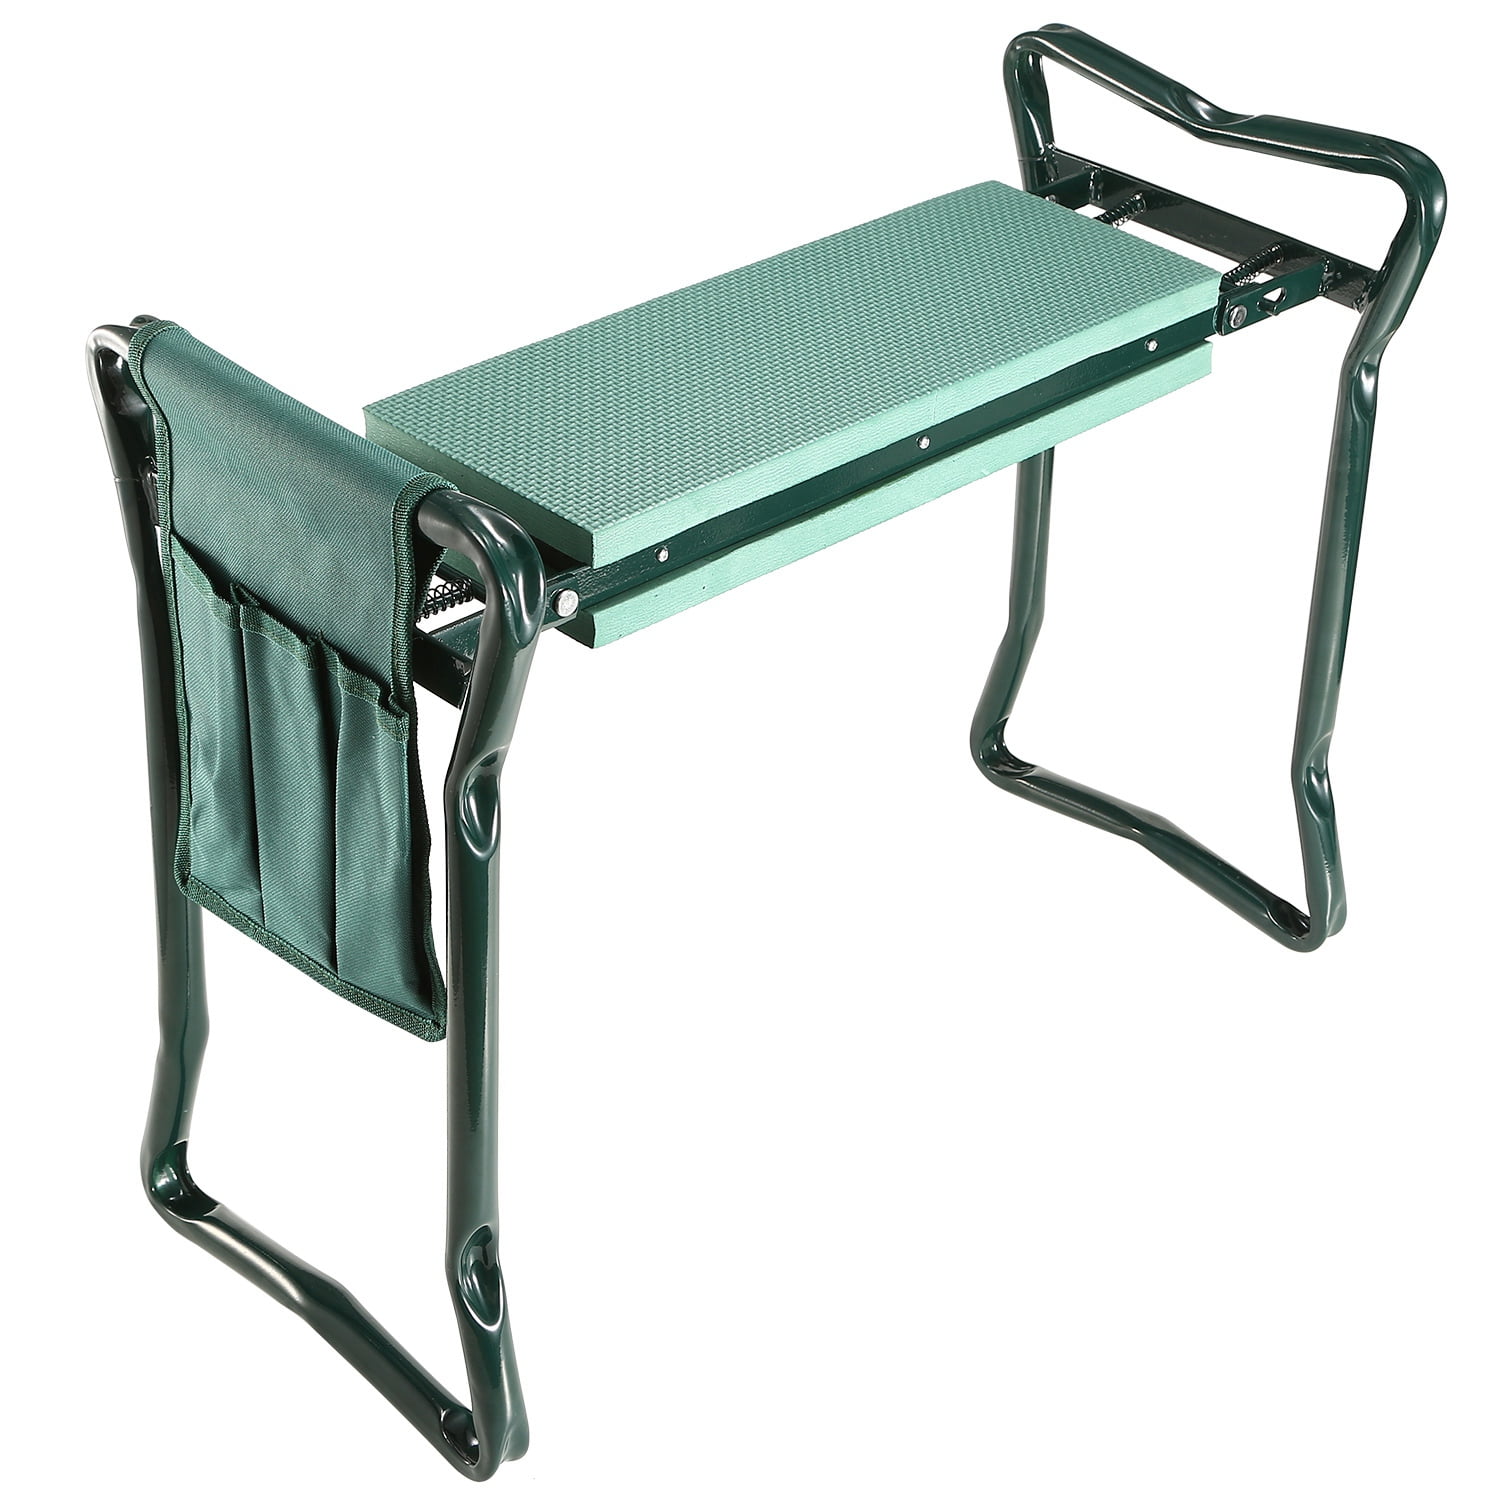 Garden Kneeler Seat Foldable Soft Kneeling Pad Bench Portable Stool w Tool Pouch 